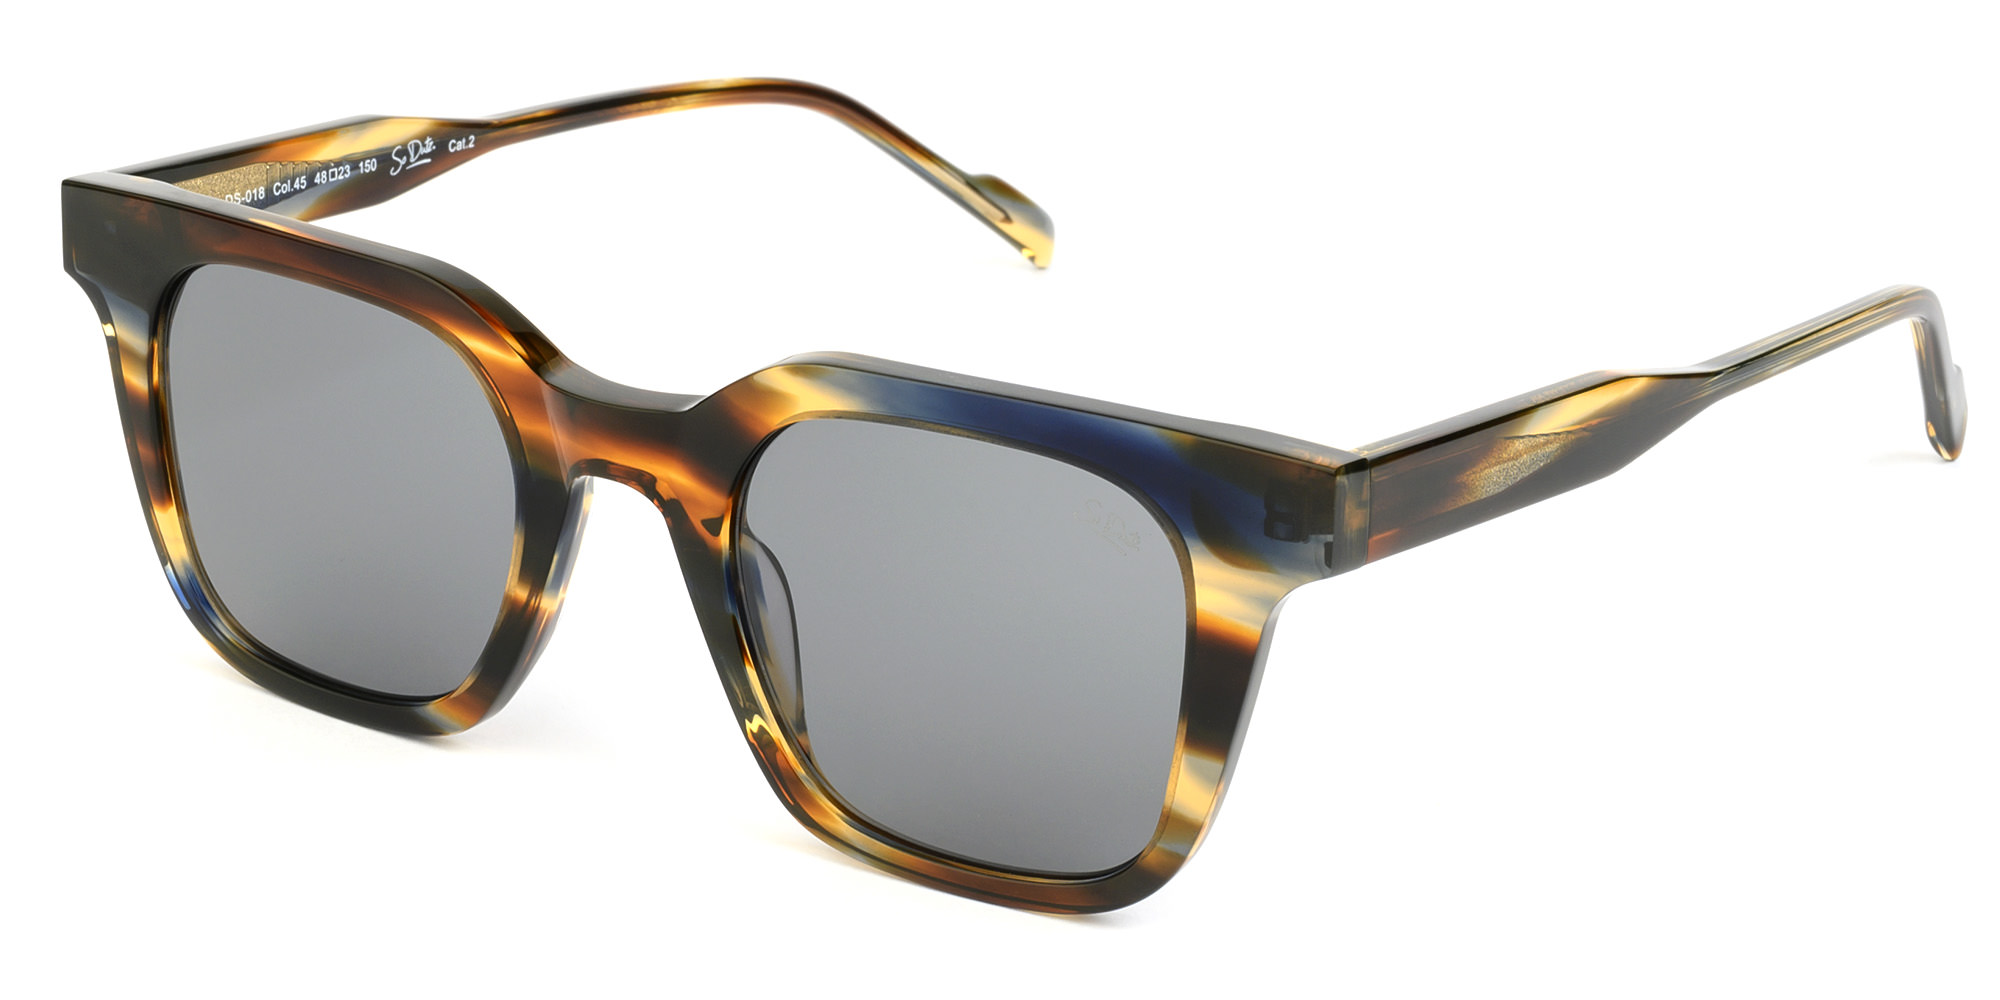 Brown-blue based, multi-colored, acetate frame and temples, with matching color nylon lenses